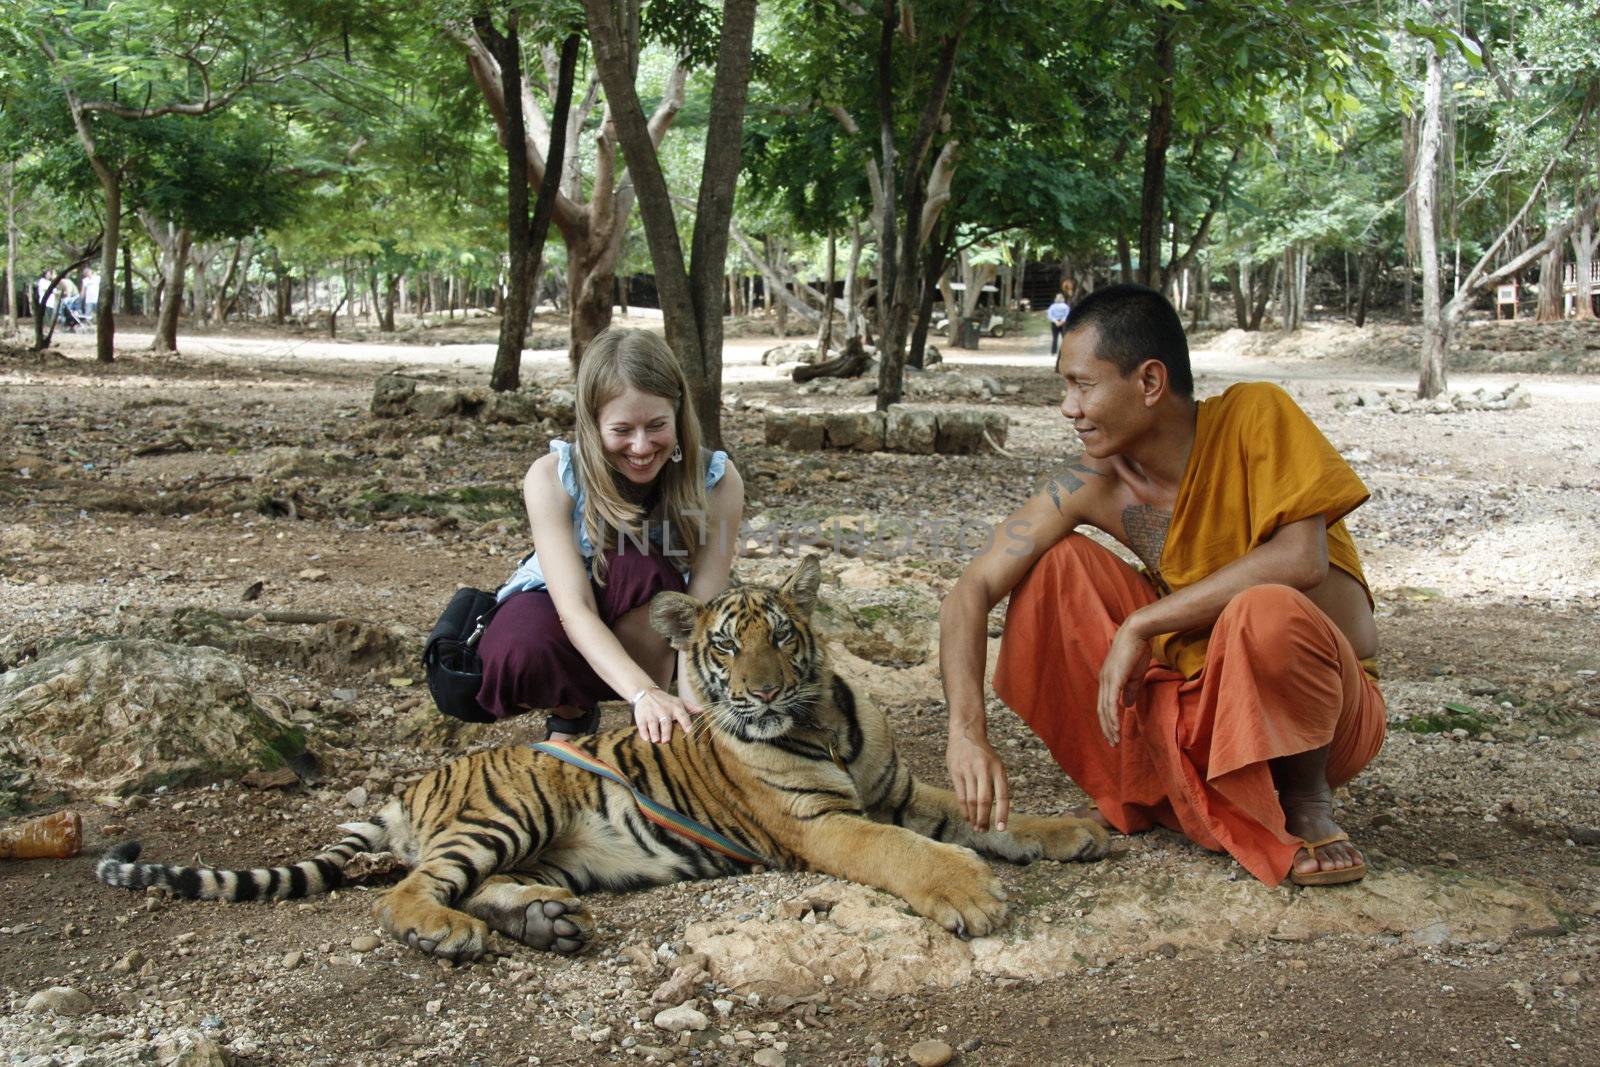 Buddhist monk and young tourist girl with the Tiger in a Tiger Temple, Kanchanaburi province, Thailand